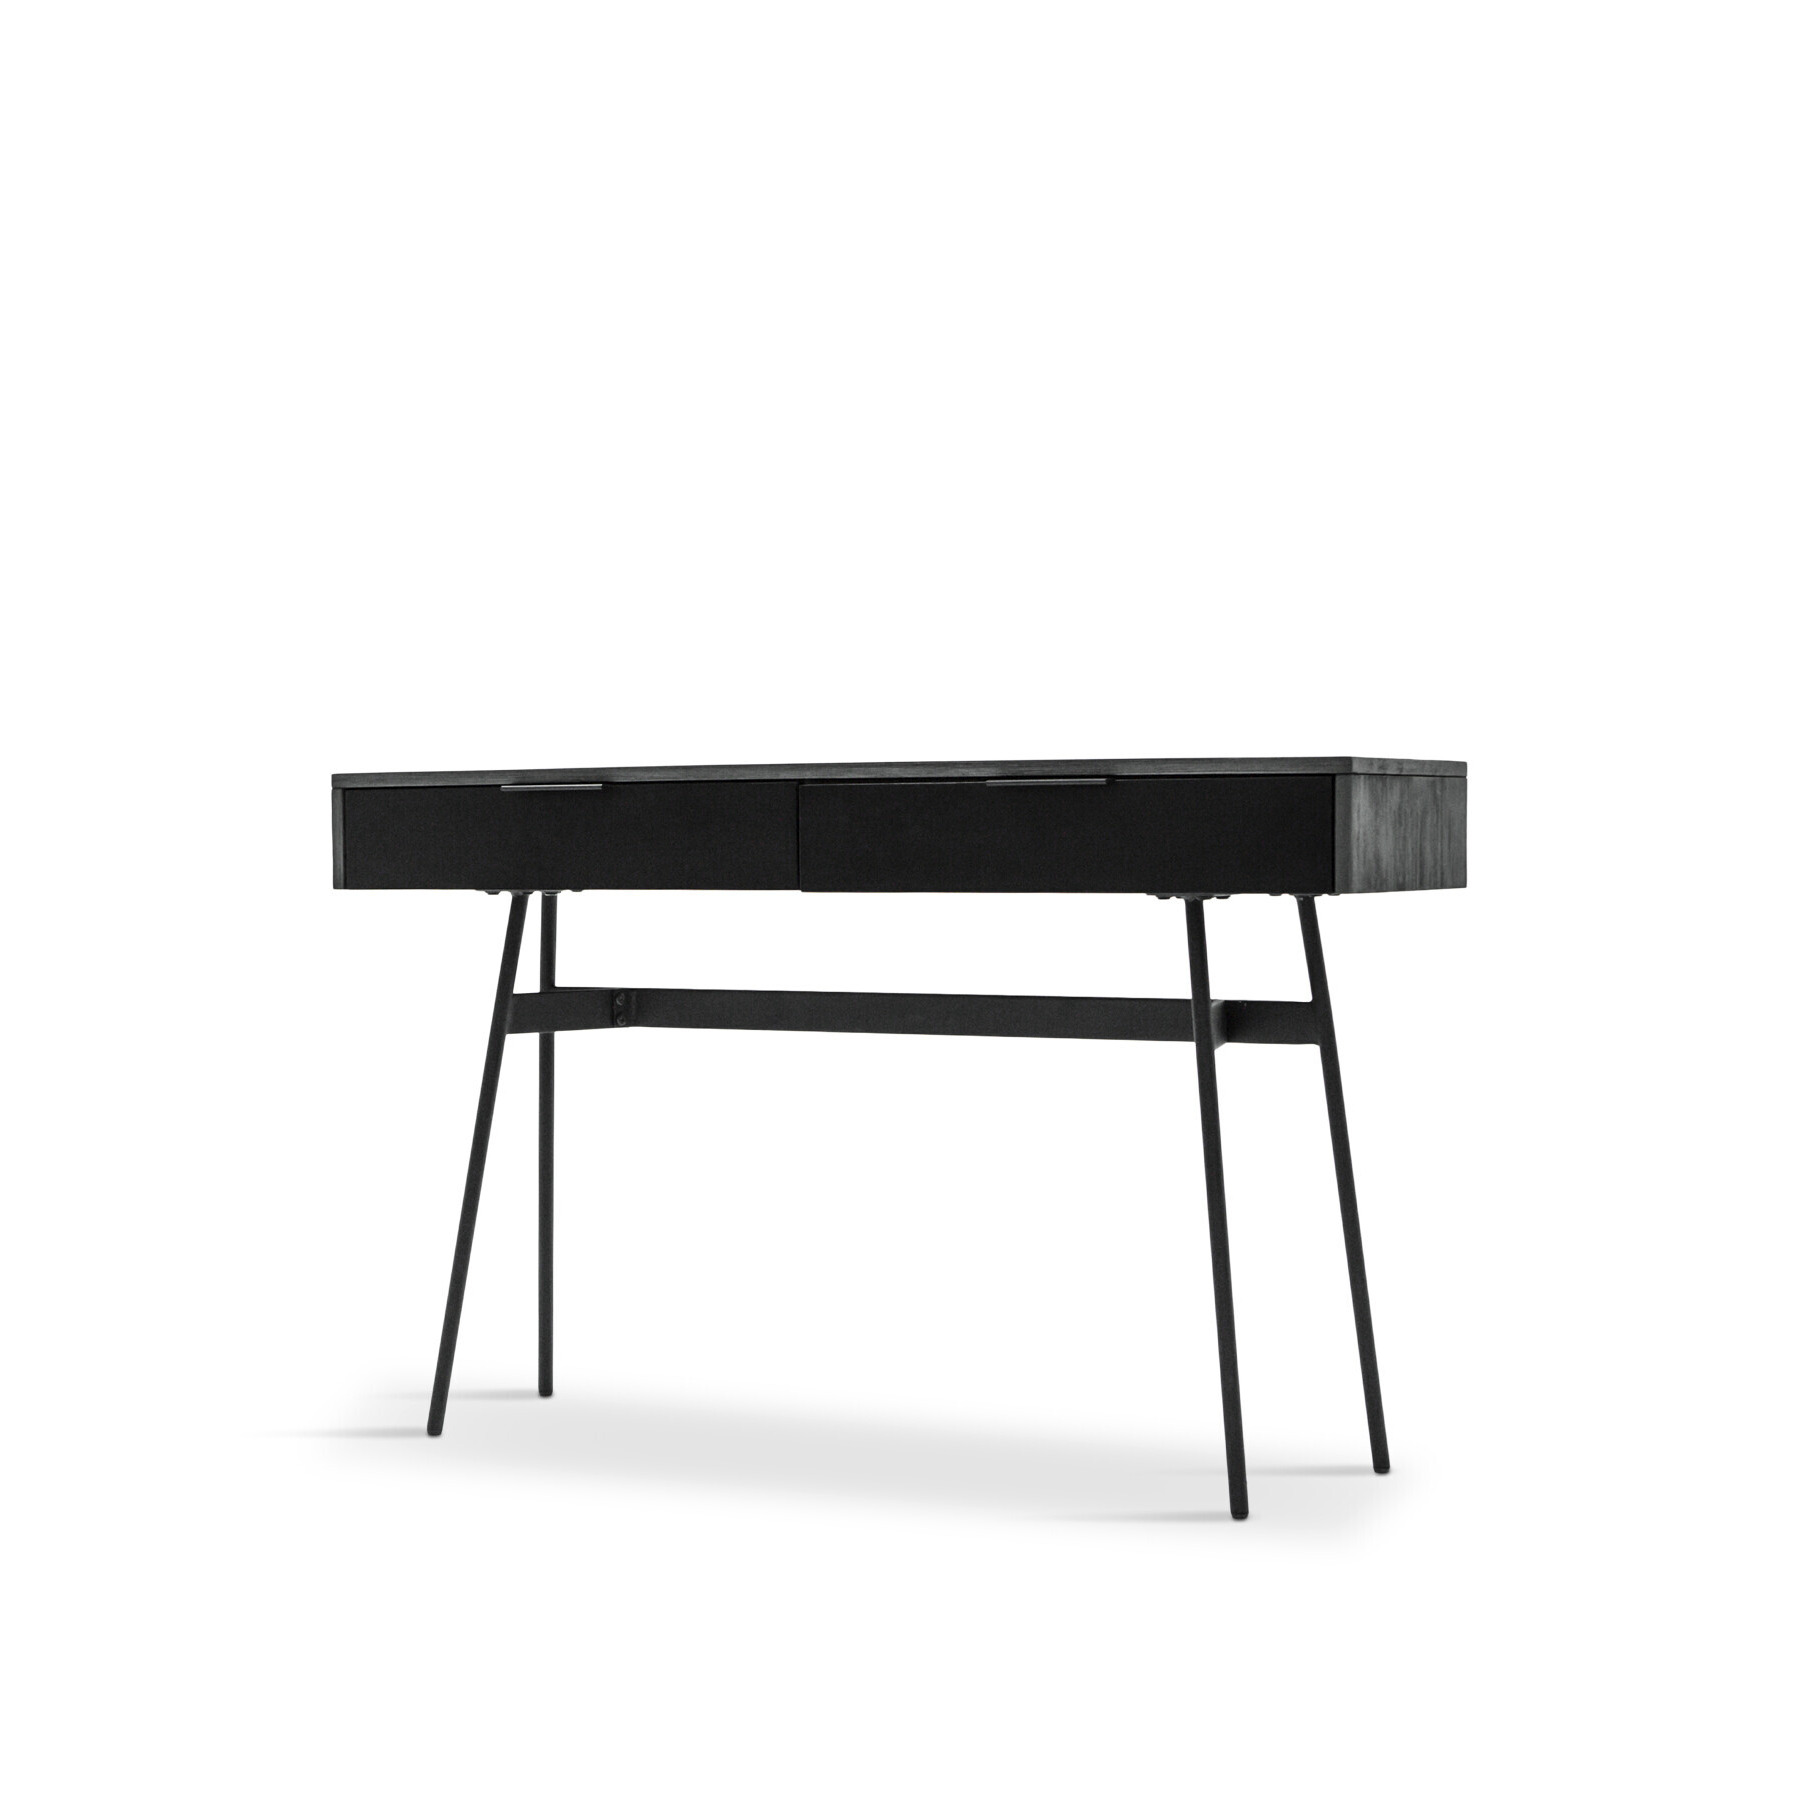 Libra Interiors Bronks Black Acacia Console Table with Two Drawers 130cm - Size 130x35x80 - image 1